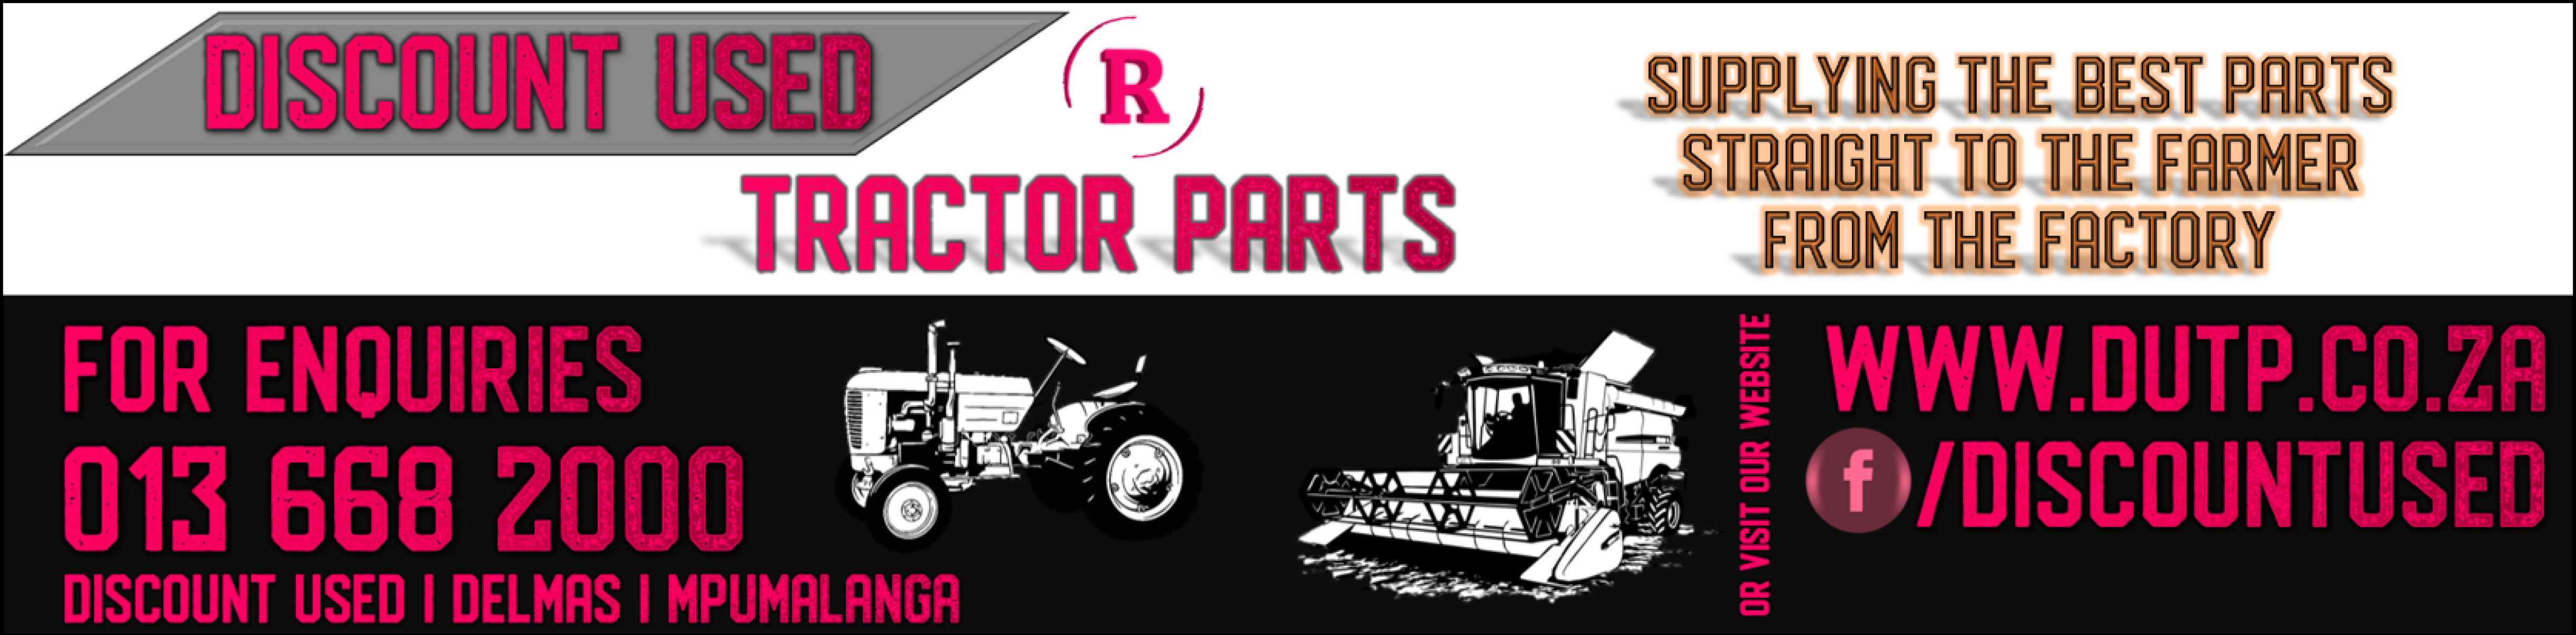 Discount Used Tractor Parts